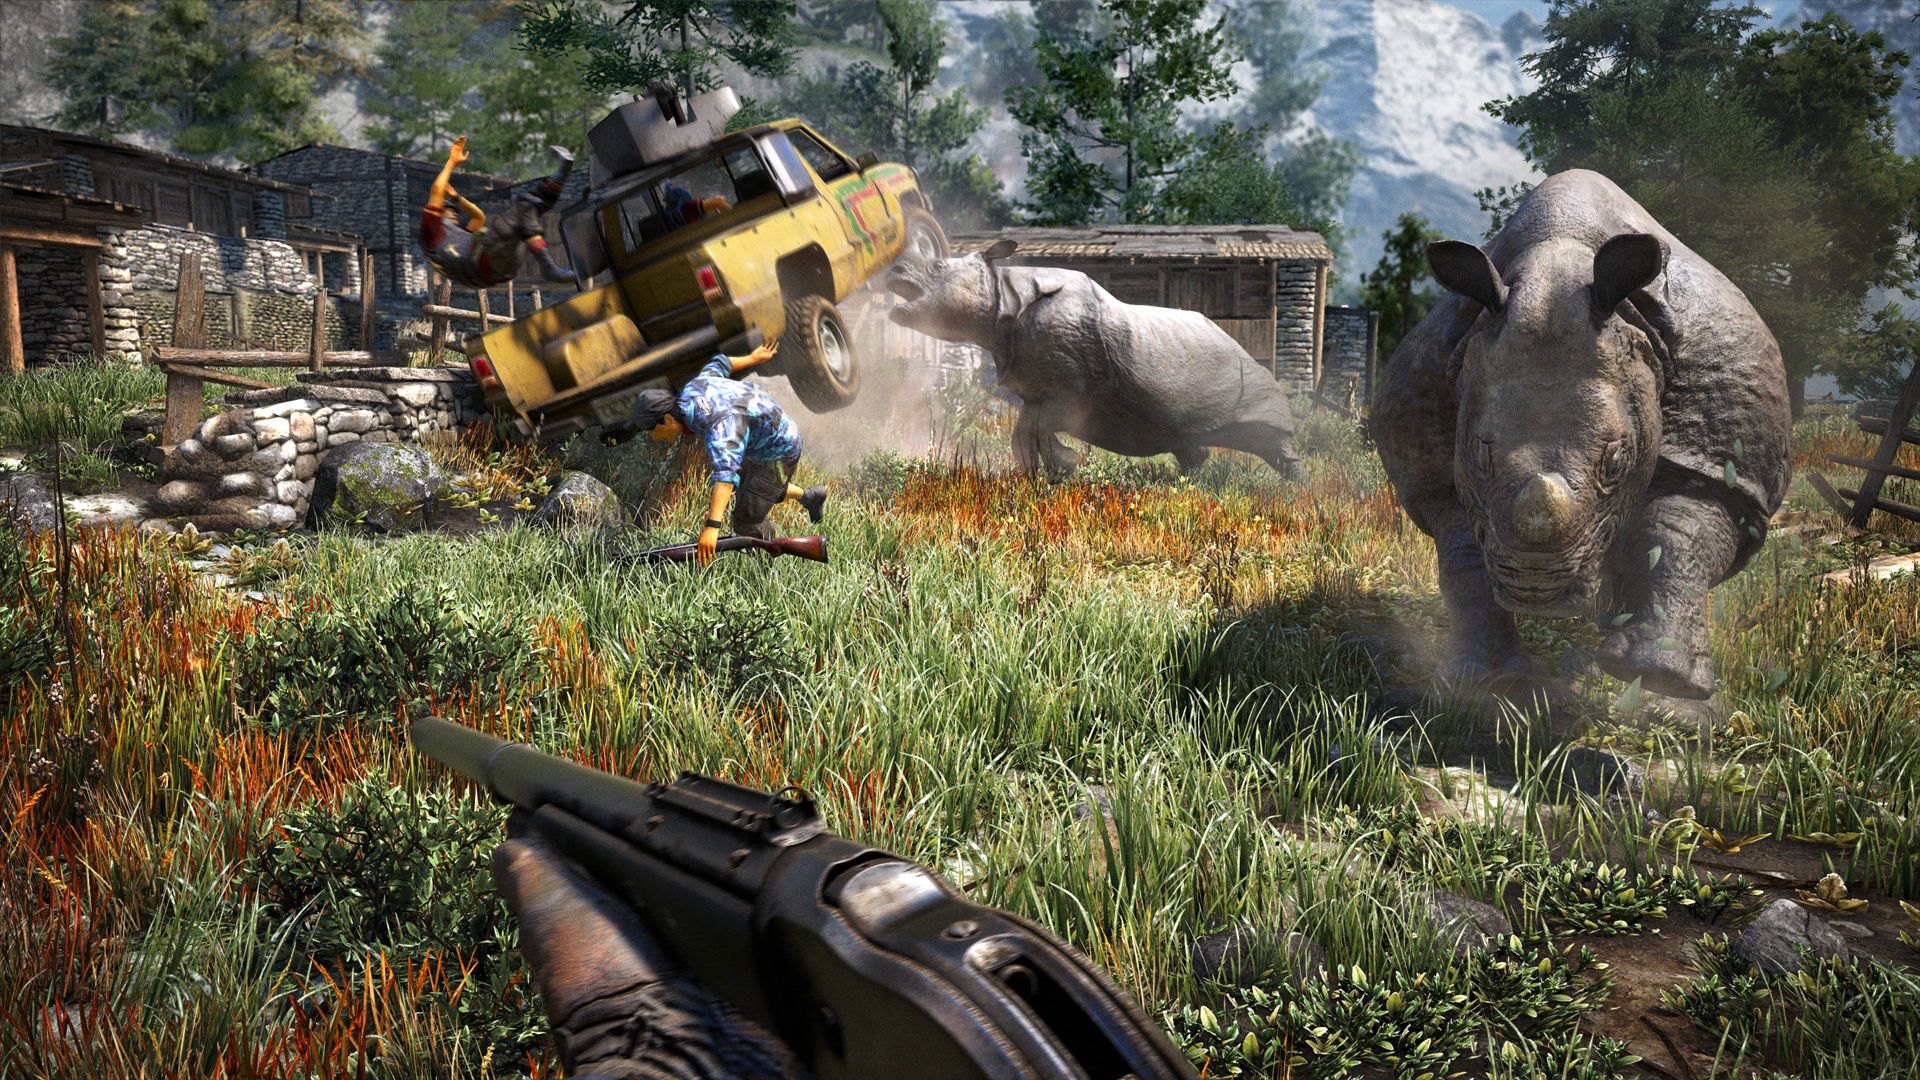 Far Cry 4 Review